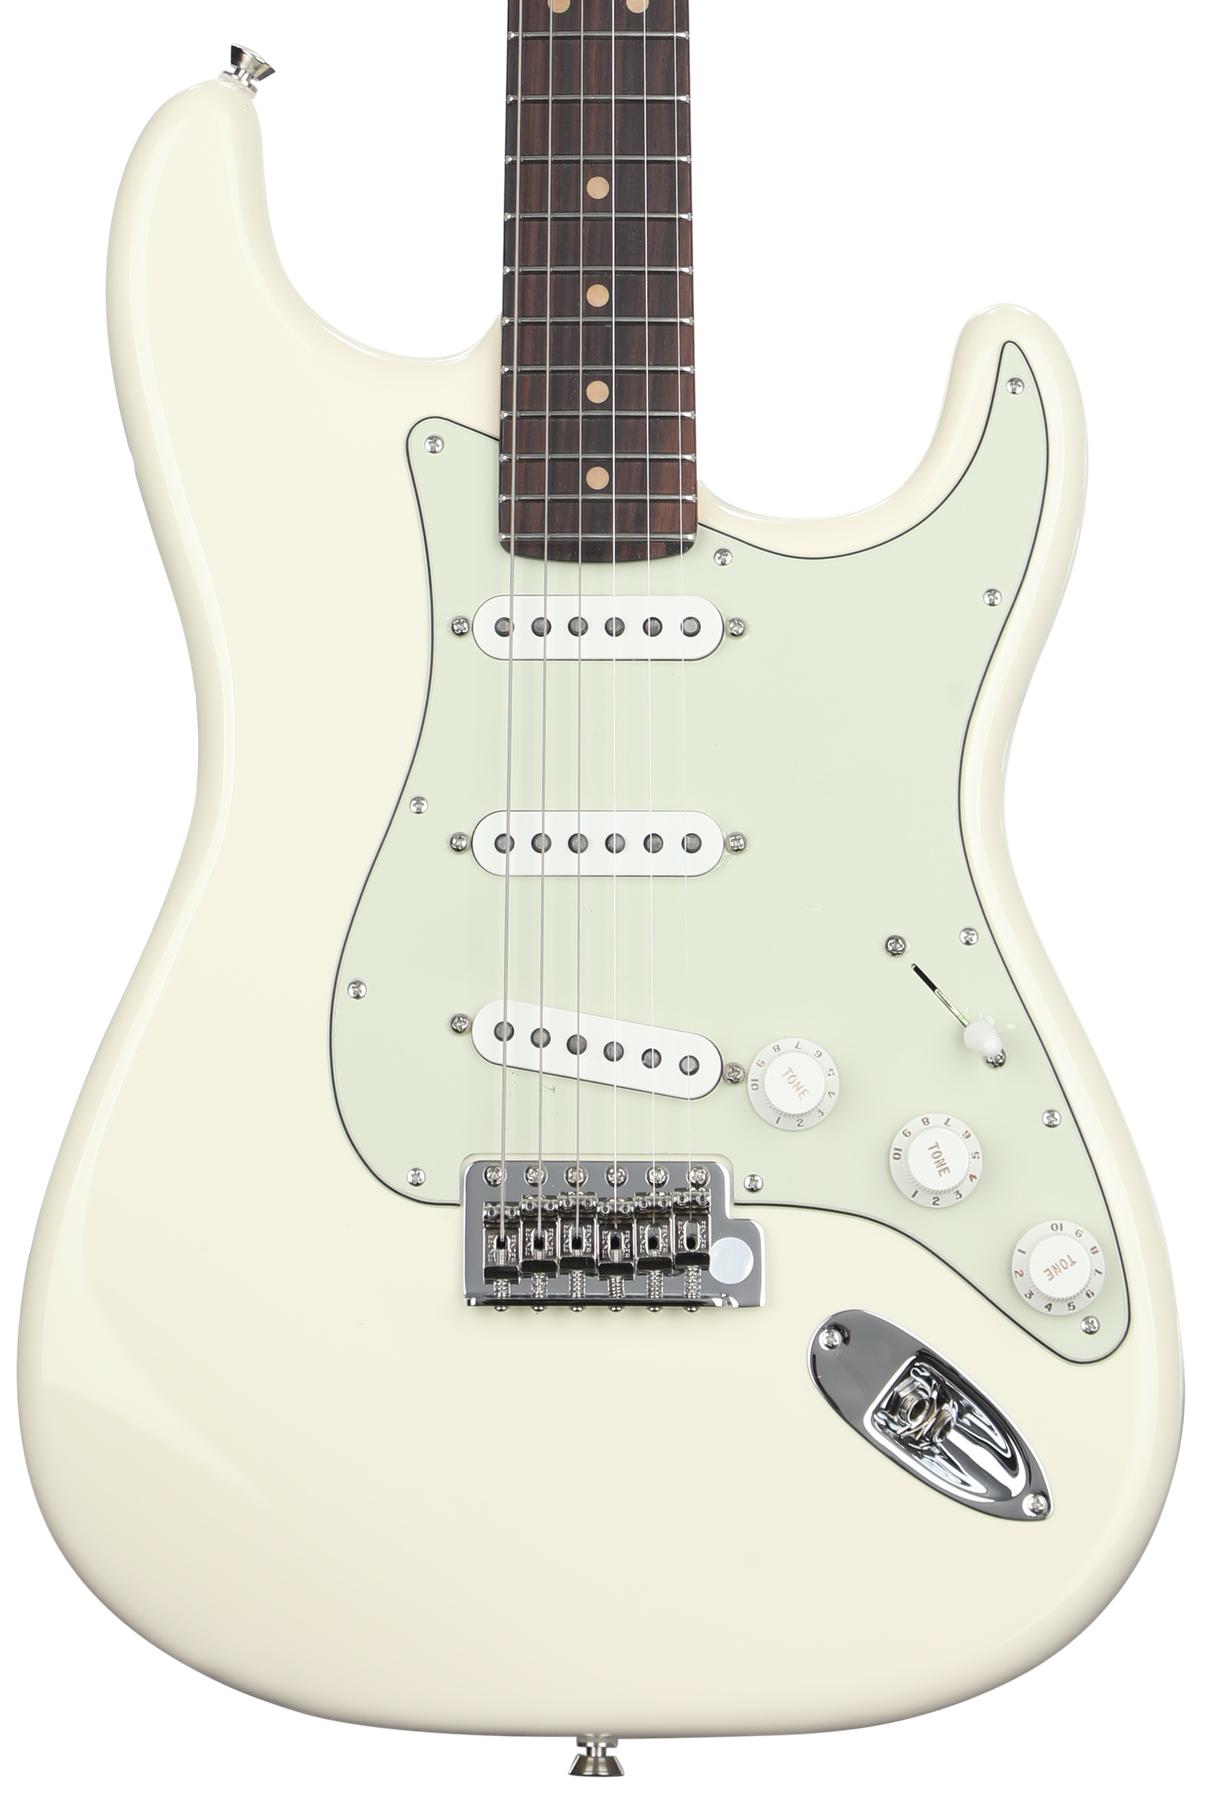 Fender American Professional II GT11 Stratocaster - Olympic White 